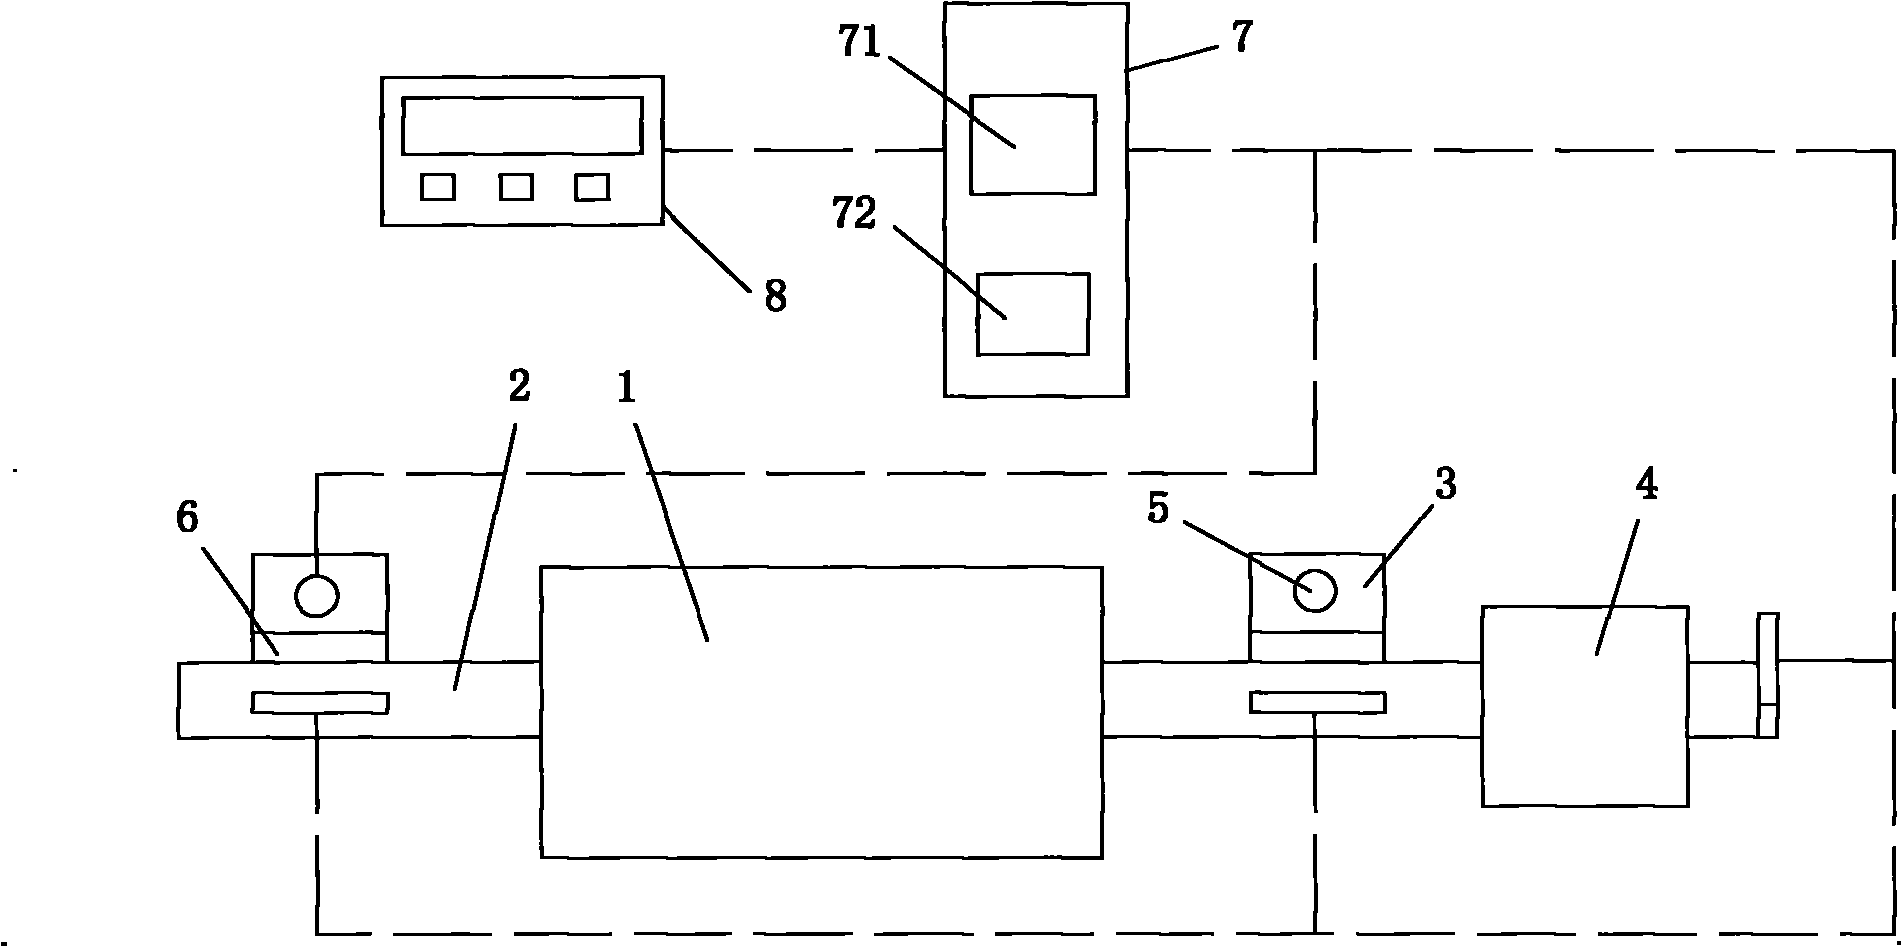 Draught fan failure detection apparatus and method